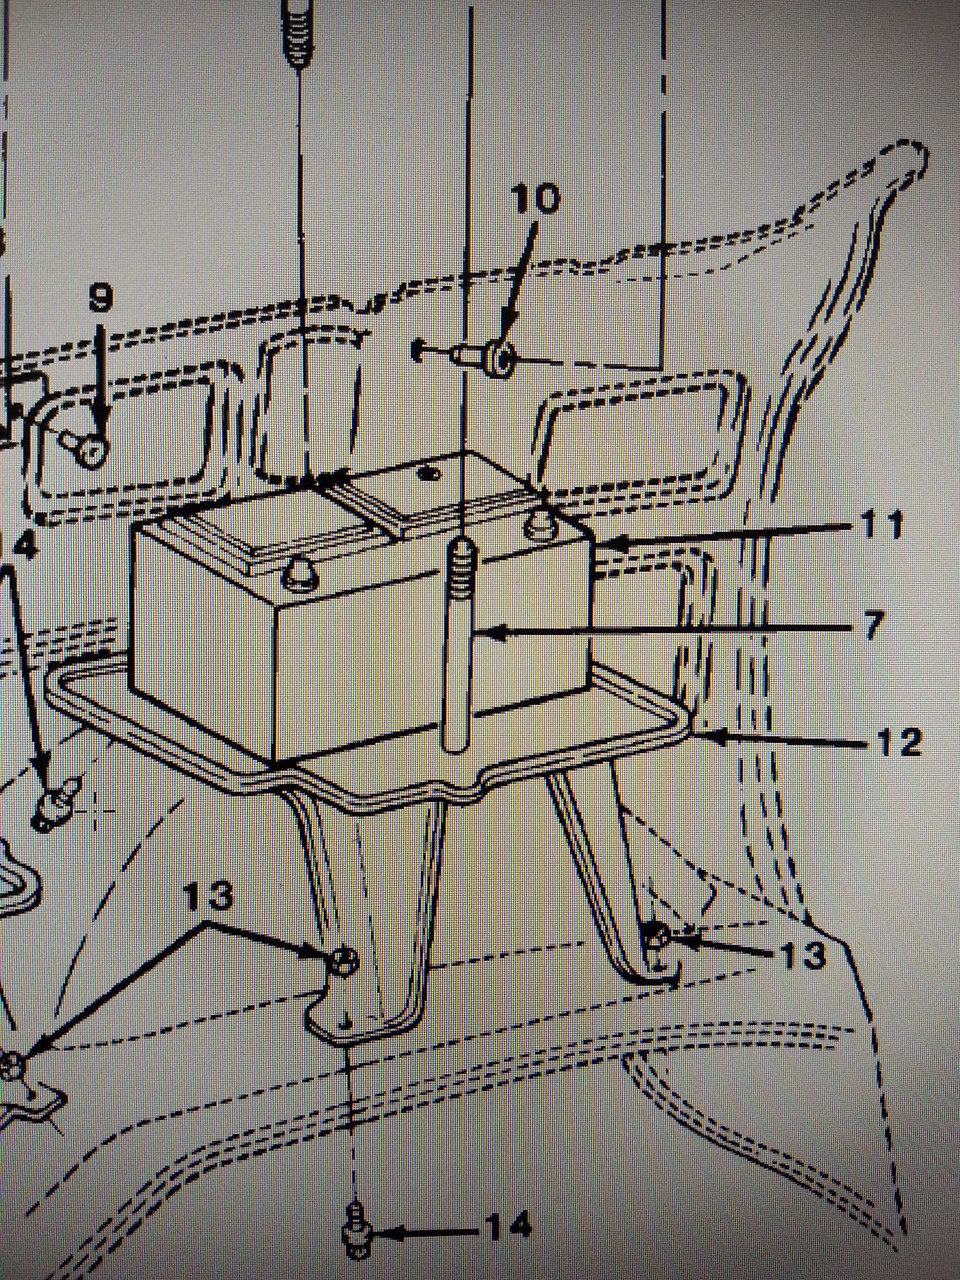 Stud for battery tray.  #7 in image shown